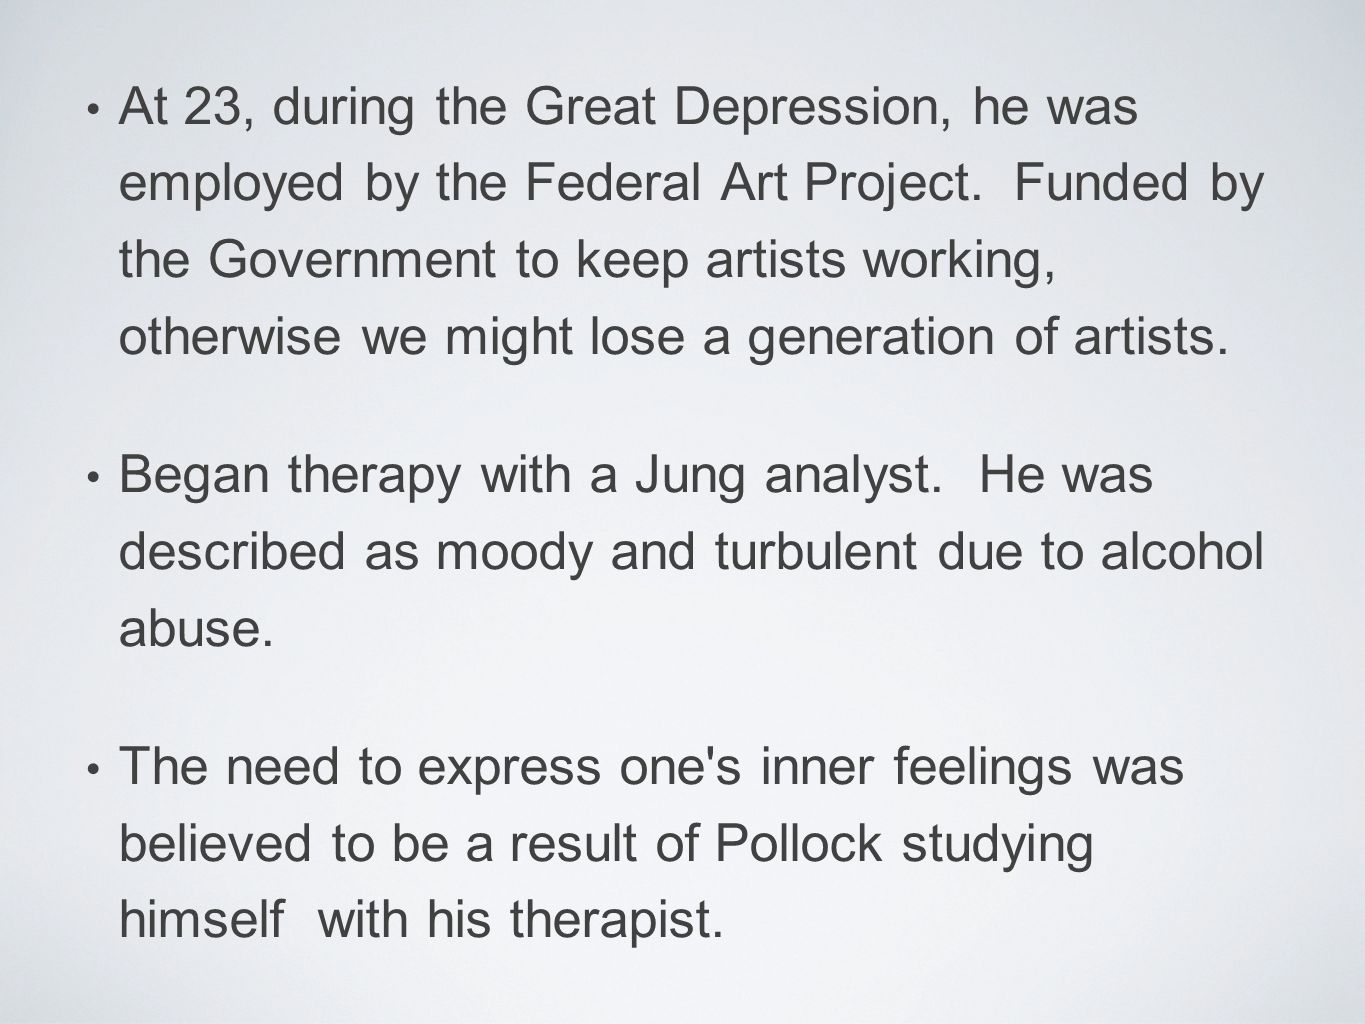 At 23, during the Great Depression, he was employed by the Federal Art Project.